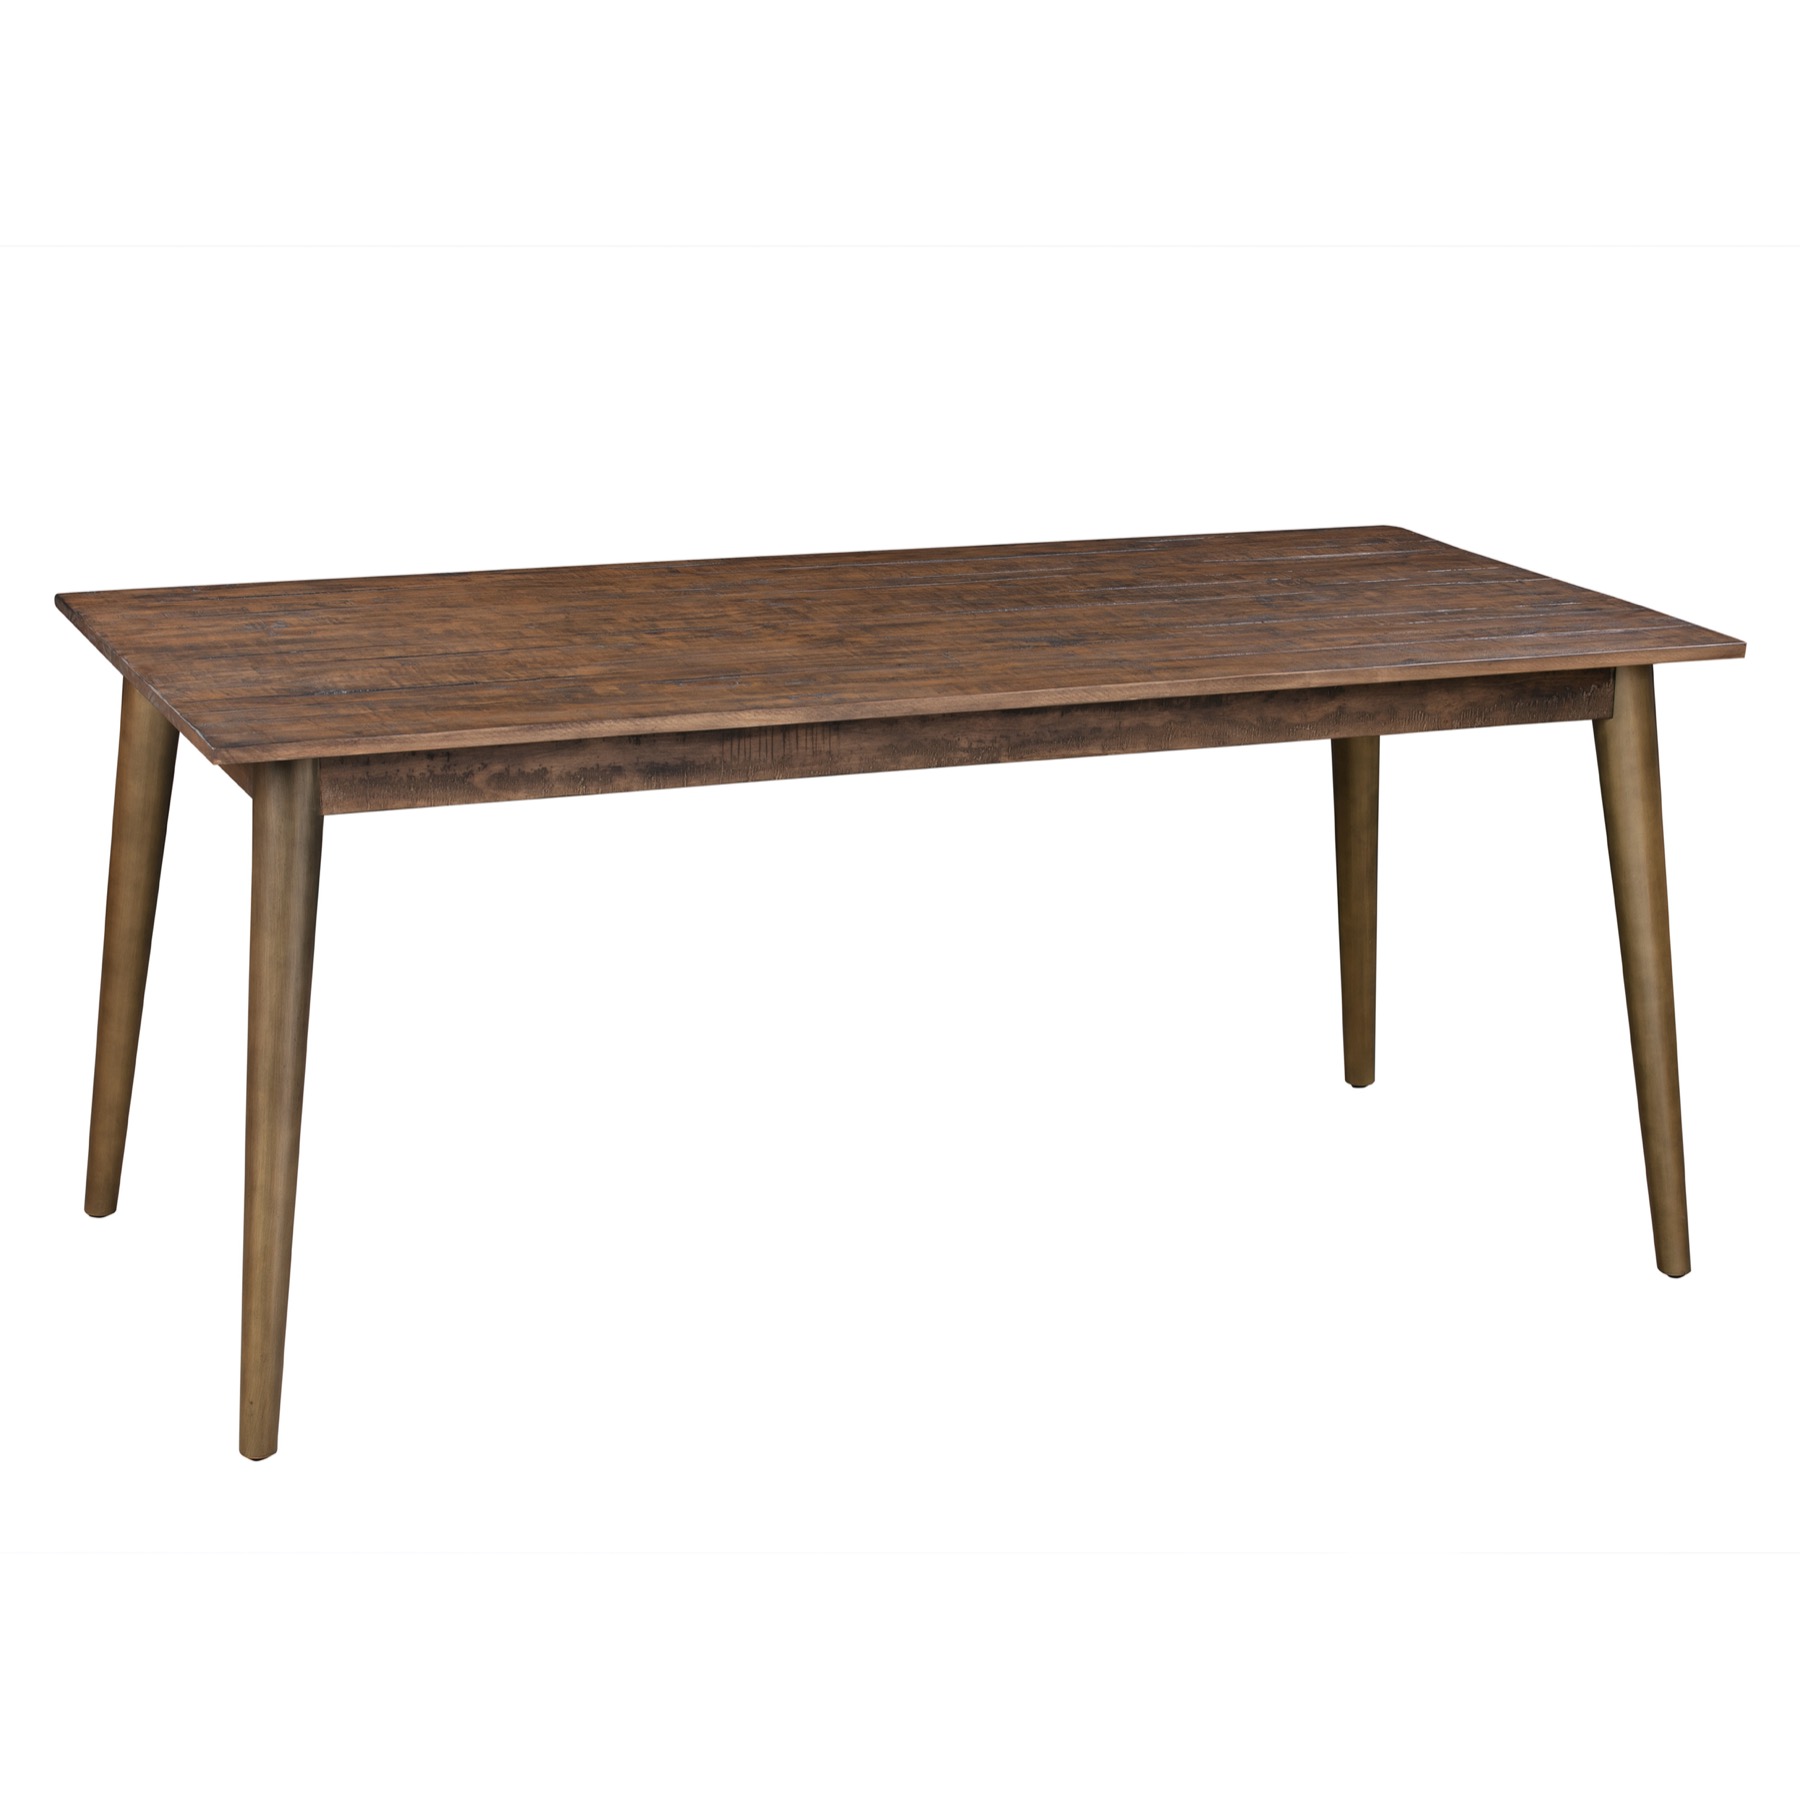 Havana Gold Dining Table - Image 1